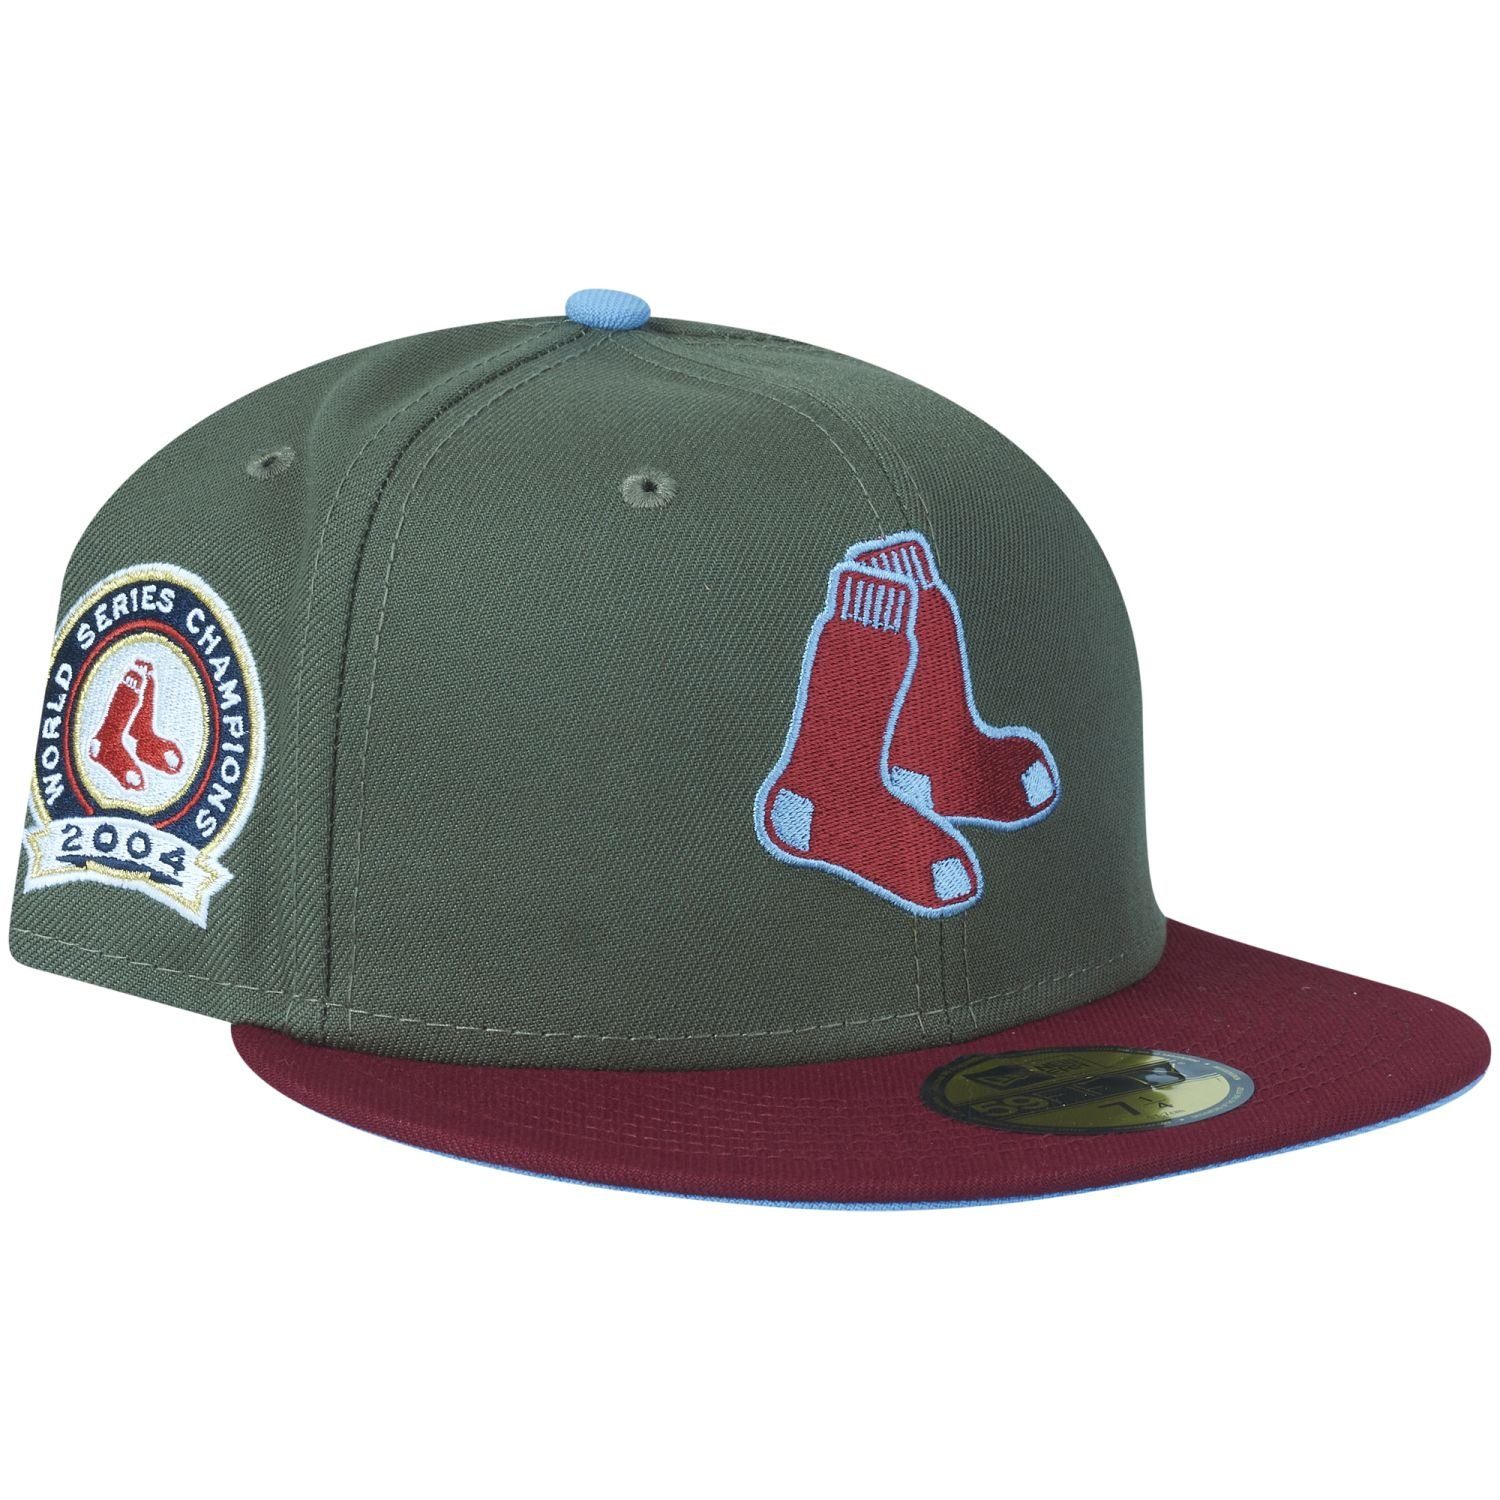 New Era Fitted Cap 59Fifty WORLD SERIES 04 Boston Red Sox | Fitted Caps